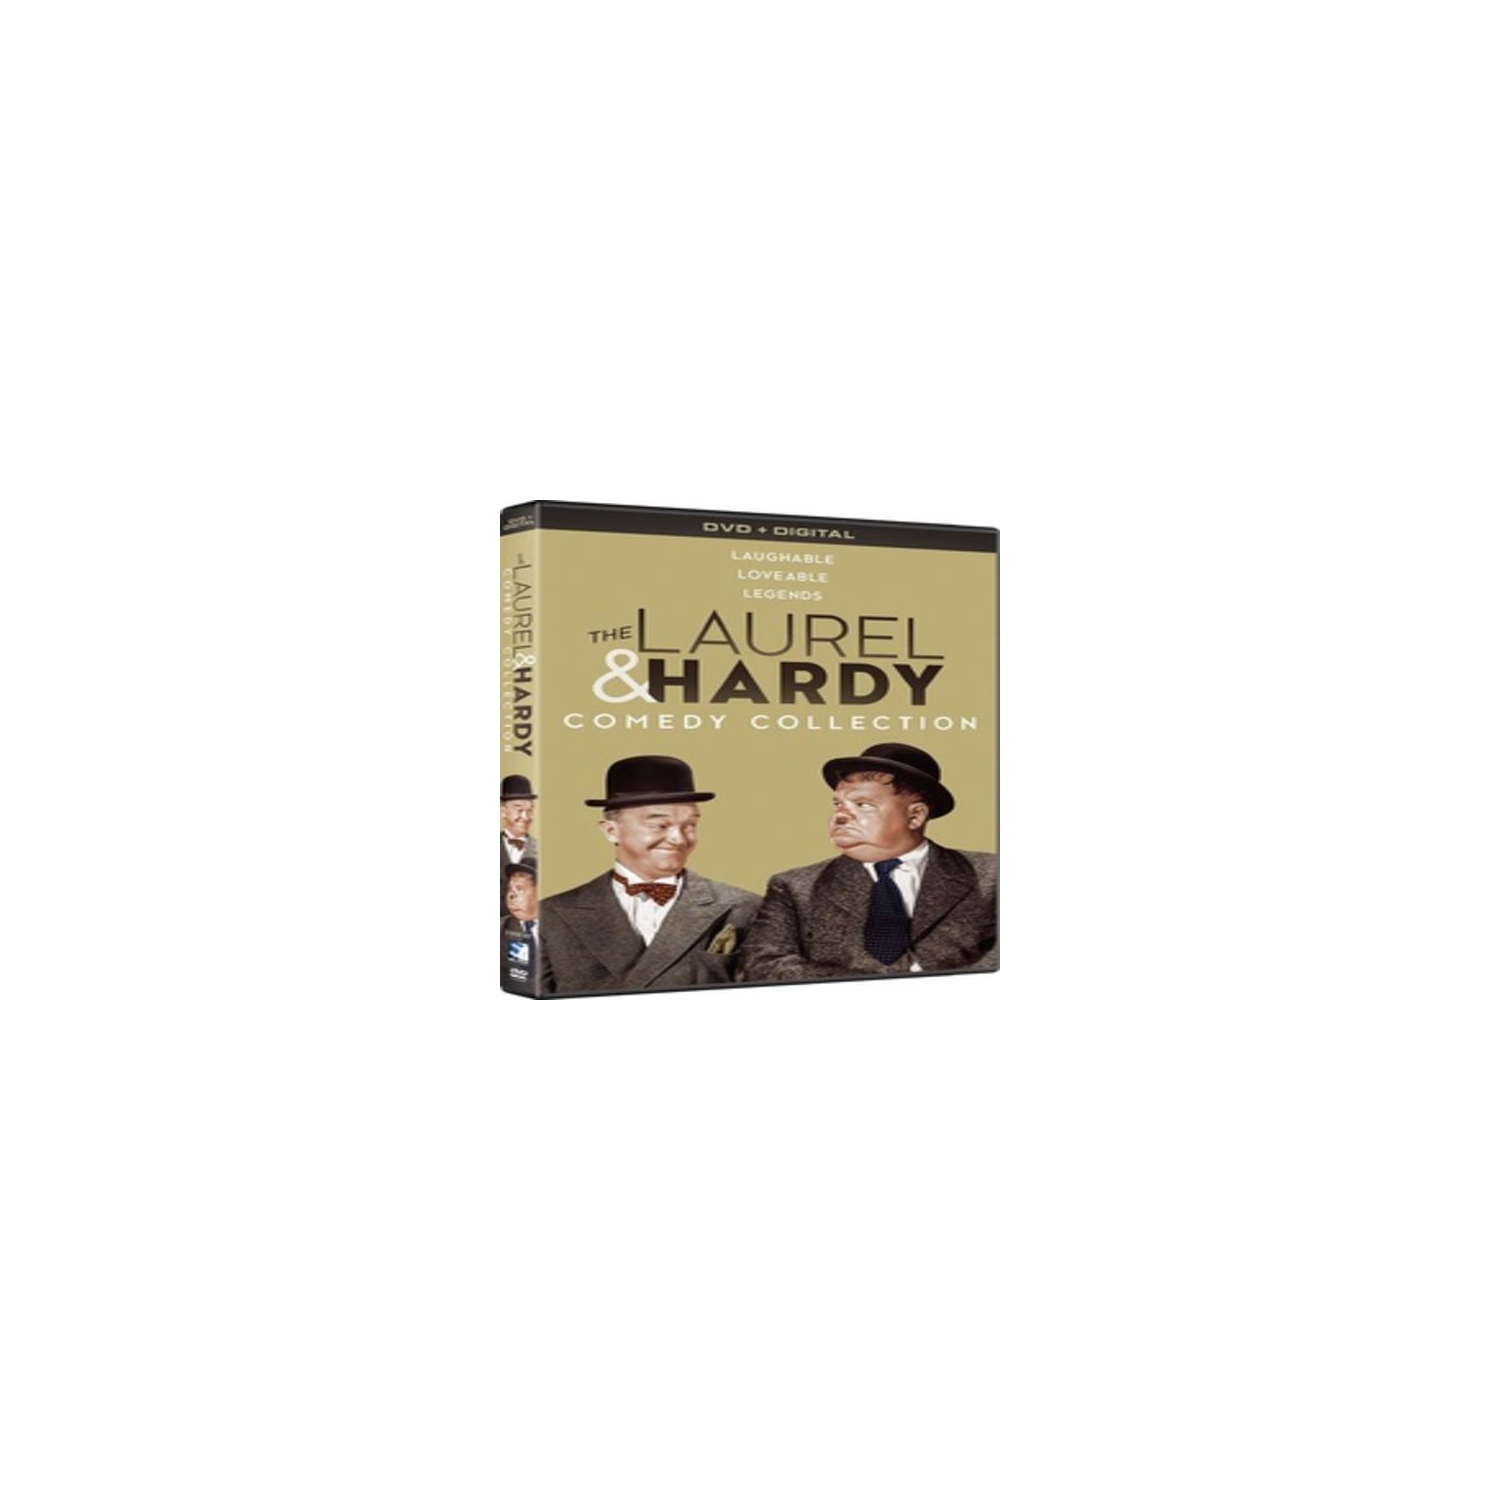 Laurel and Hardy Collection (Region Free)